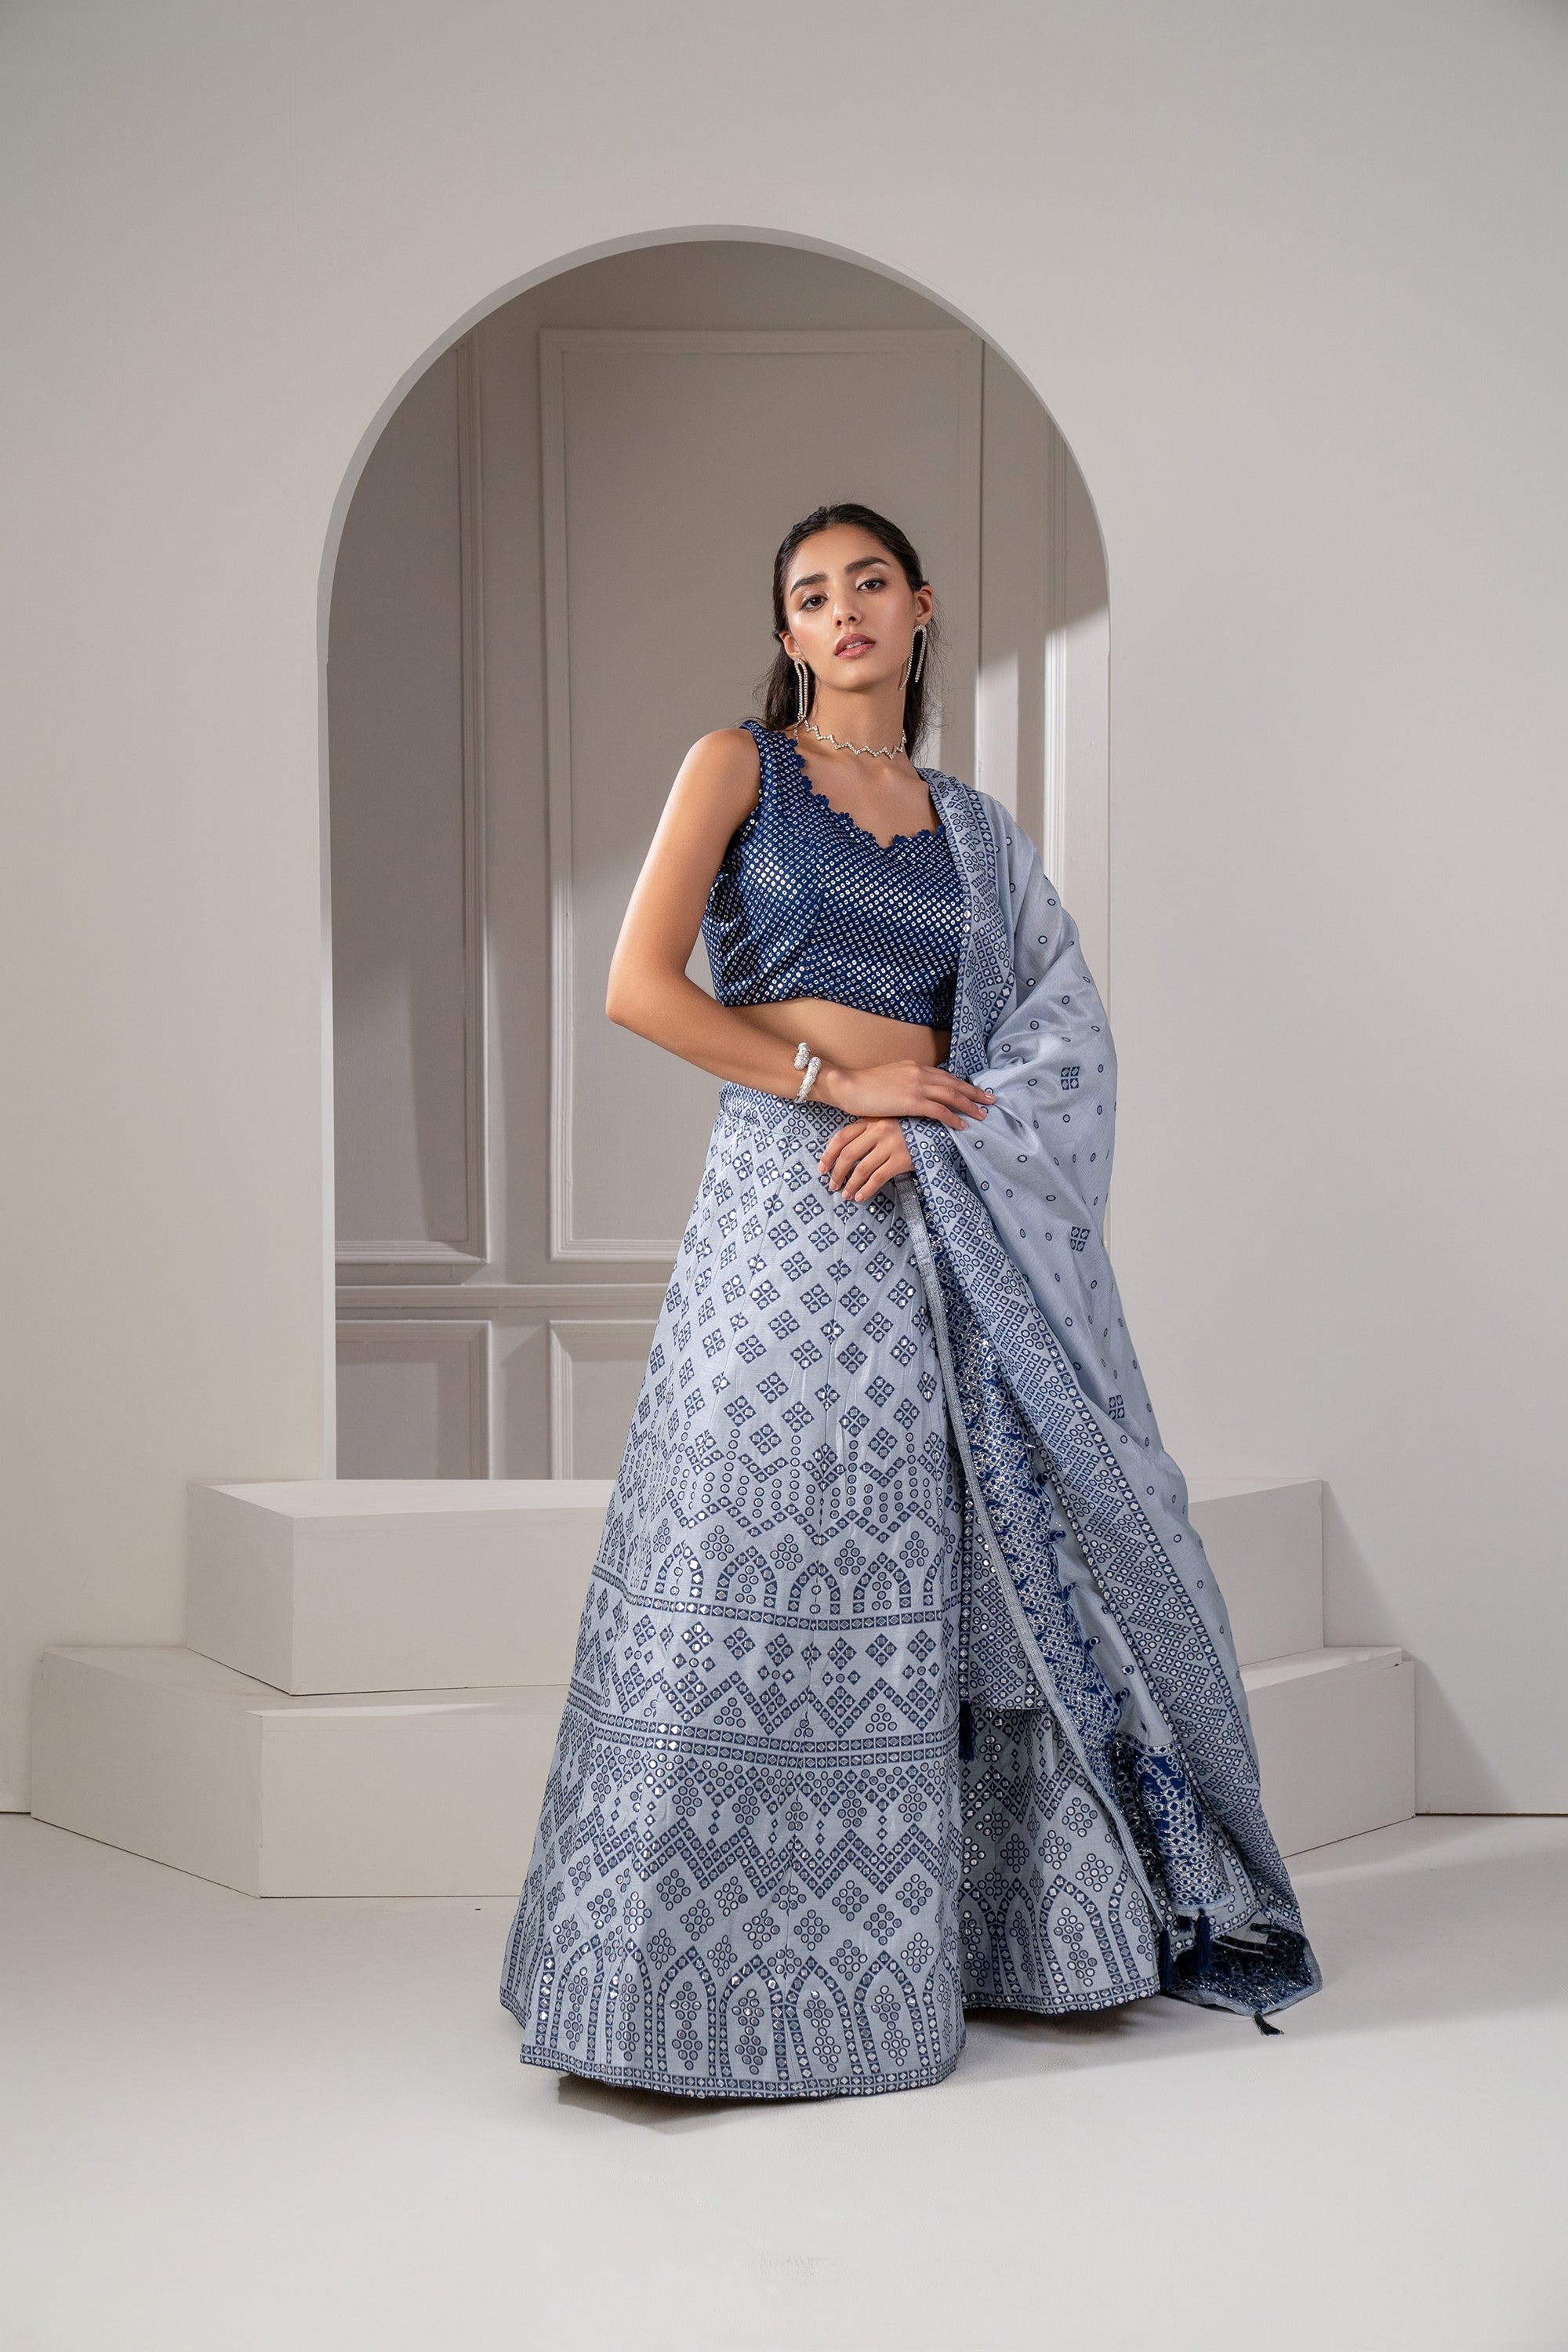 STEEL GREY LEHENGA SET WITH A HALTER NECK BLOUSE AND ALL OVER SILVER ZARI  EMBROIDERY PAIRED WITH A MATCHING EMBROIDERED DUPATTA AND SILVER  EMBELLISHMENTS. - Seasons India